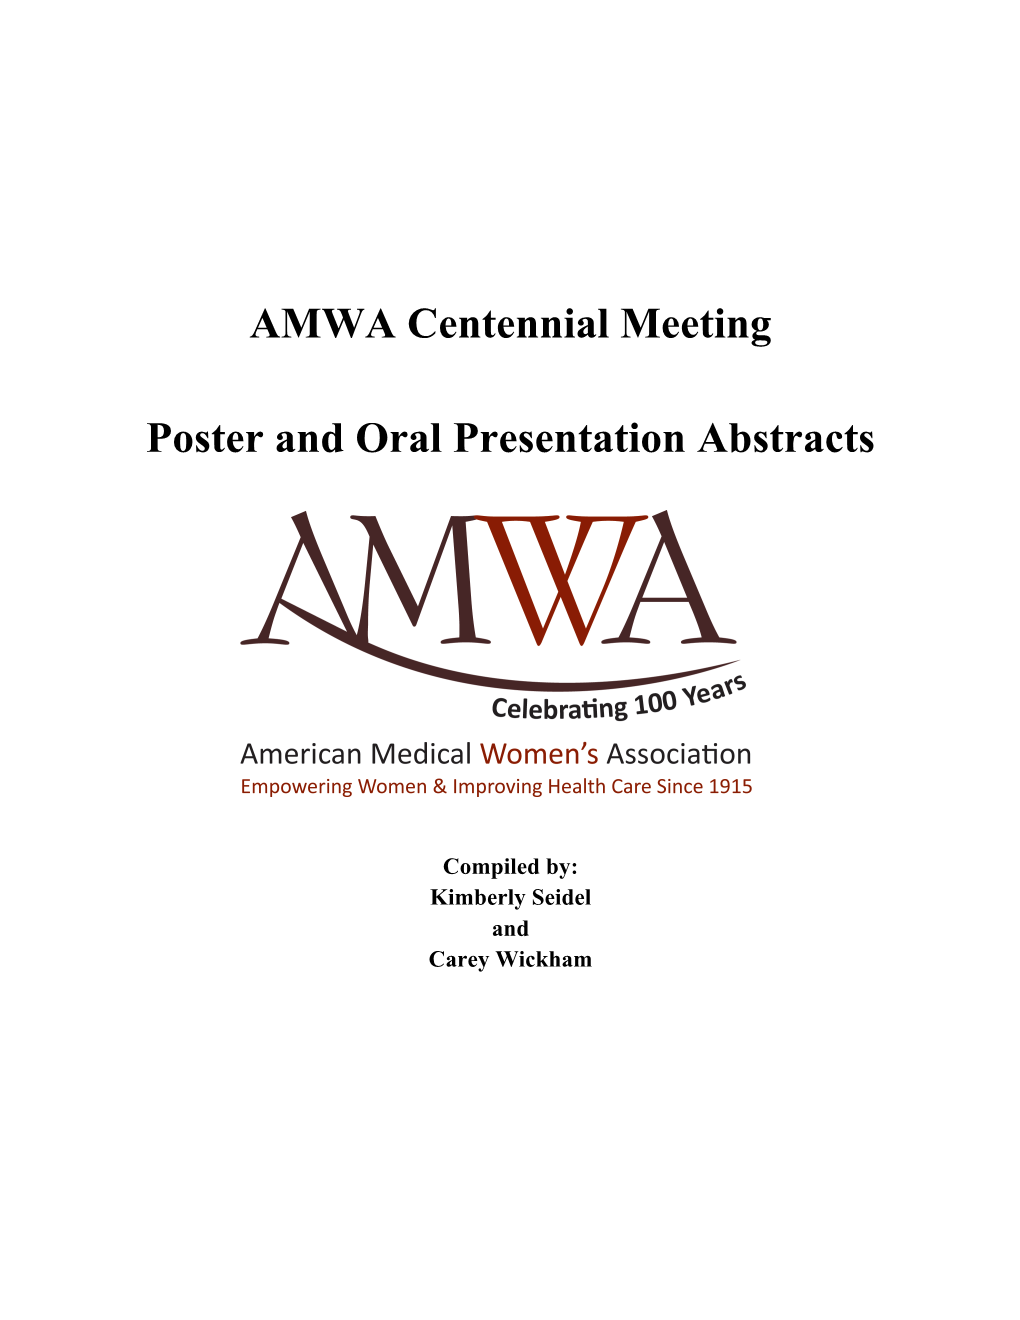 AMWA Centennial Meeting Poster and Oral Presentation Abstracts